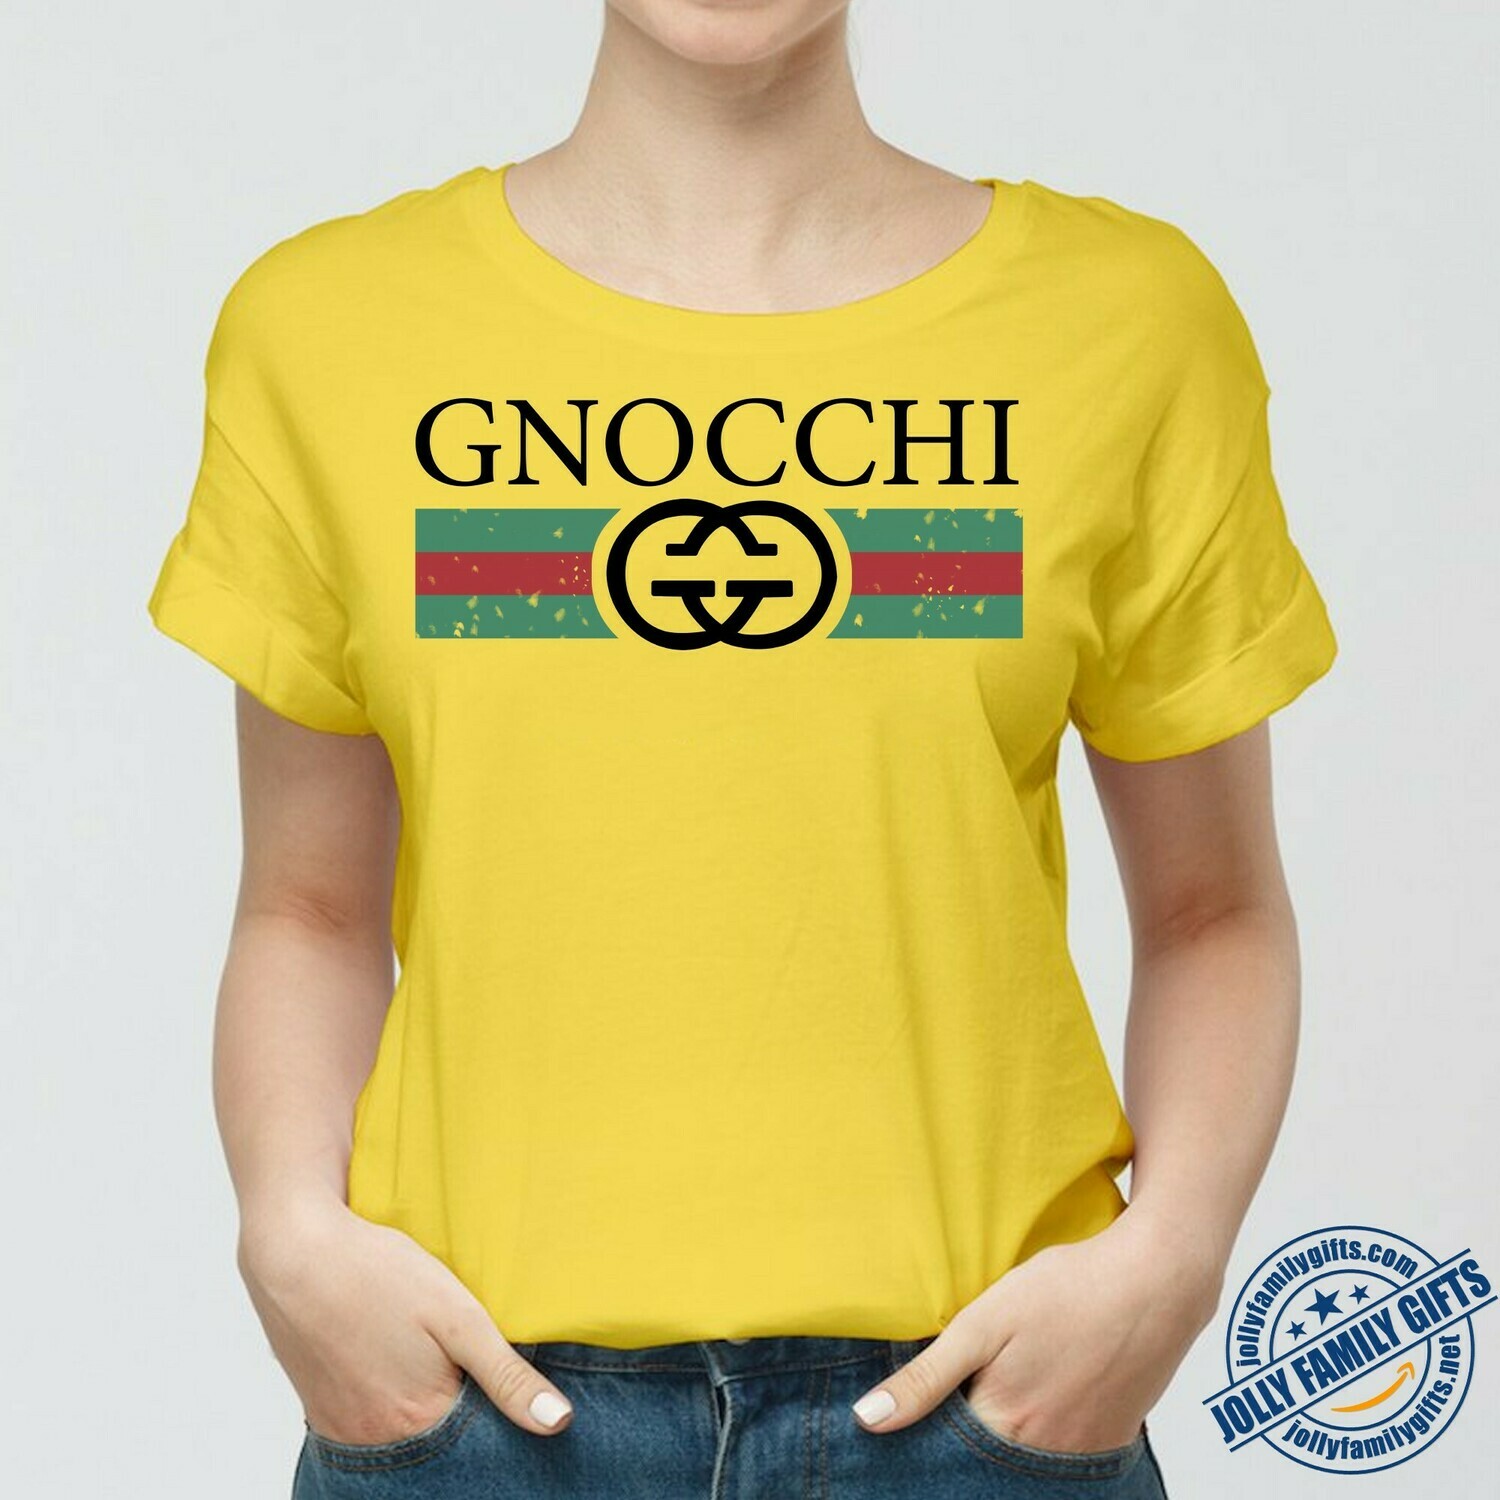 how much does it cost to make a gucci shirt